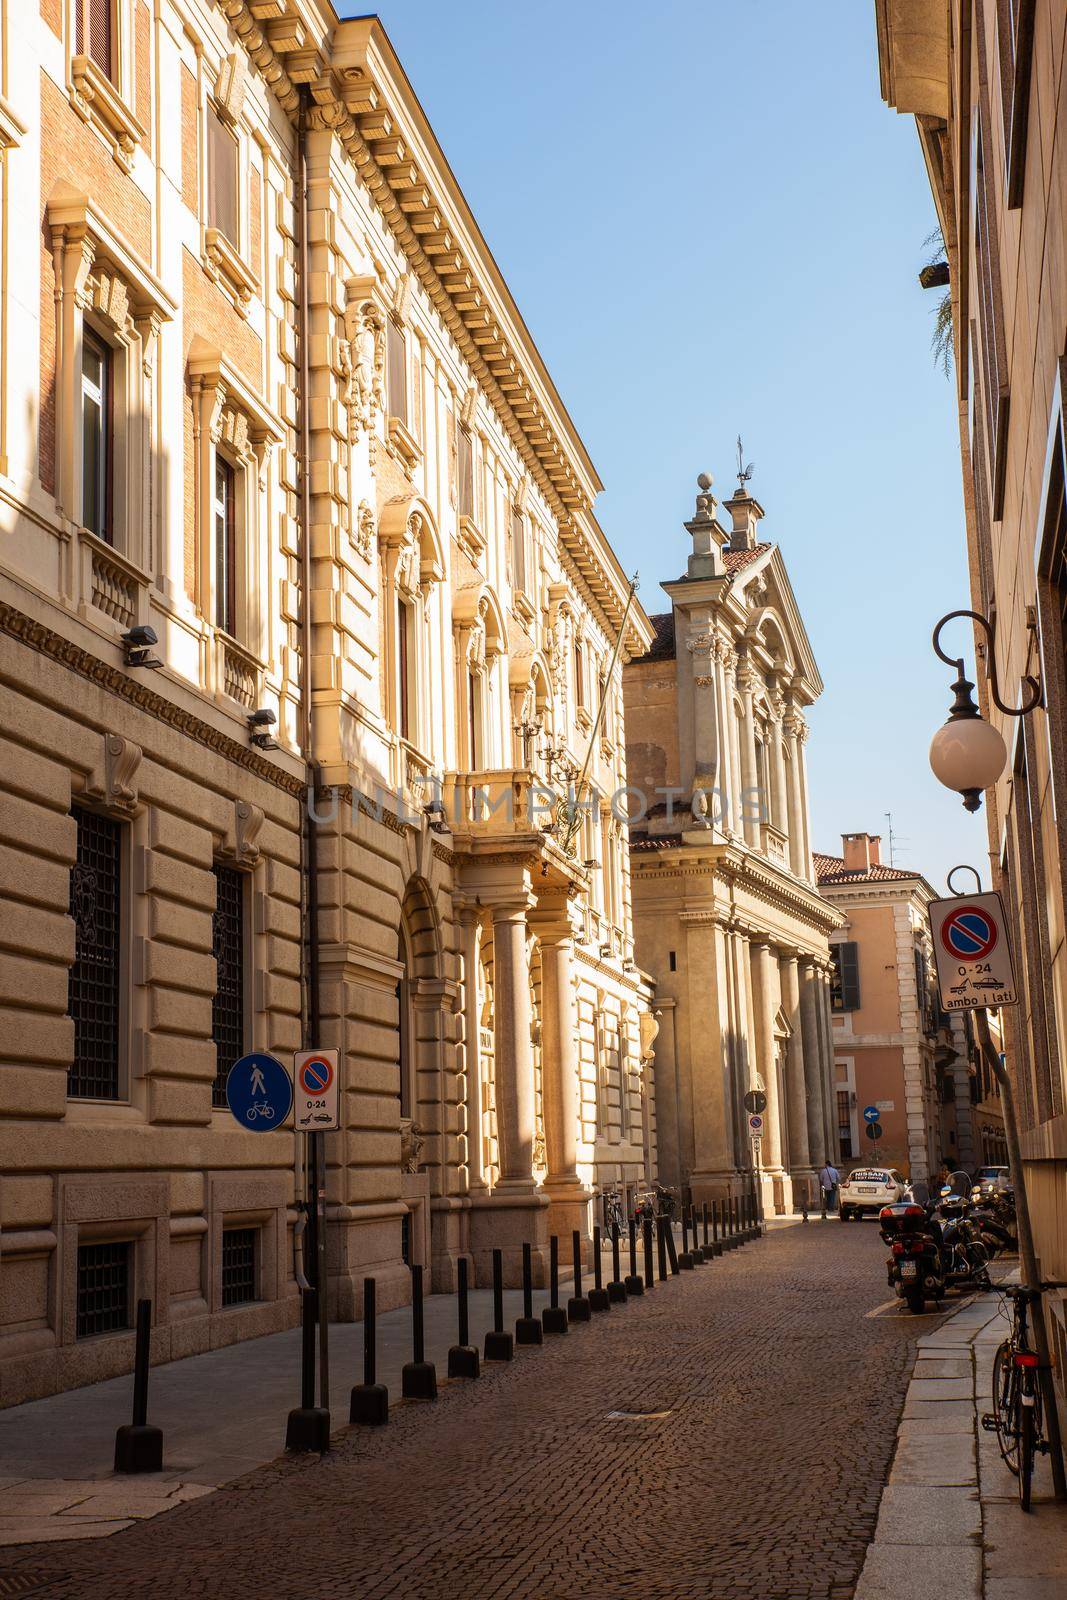 View of typical street in Novara, Italy